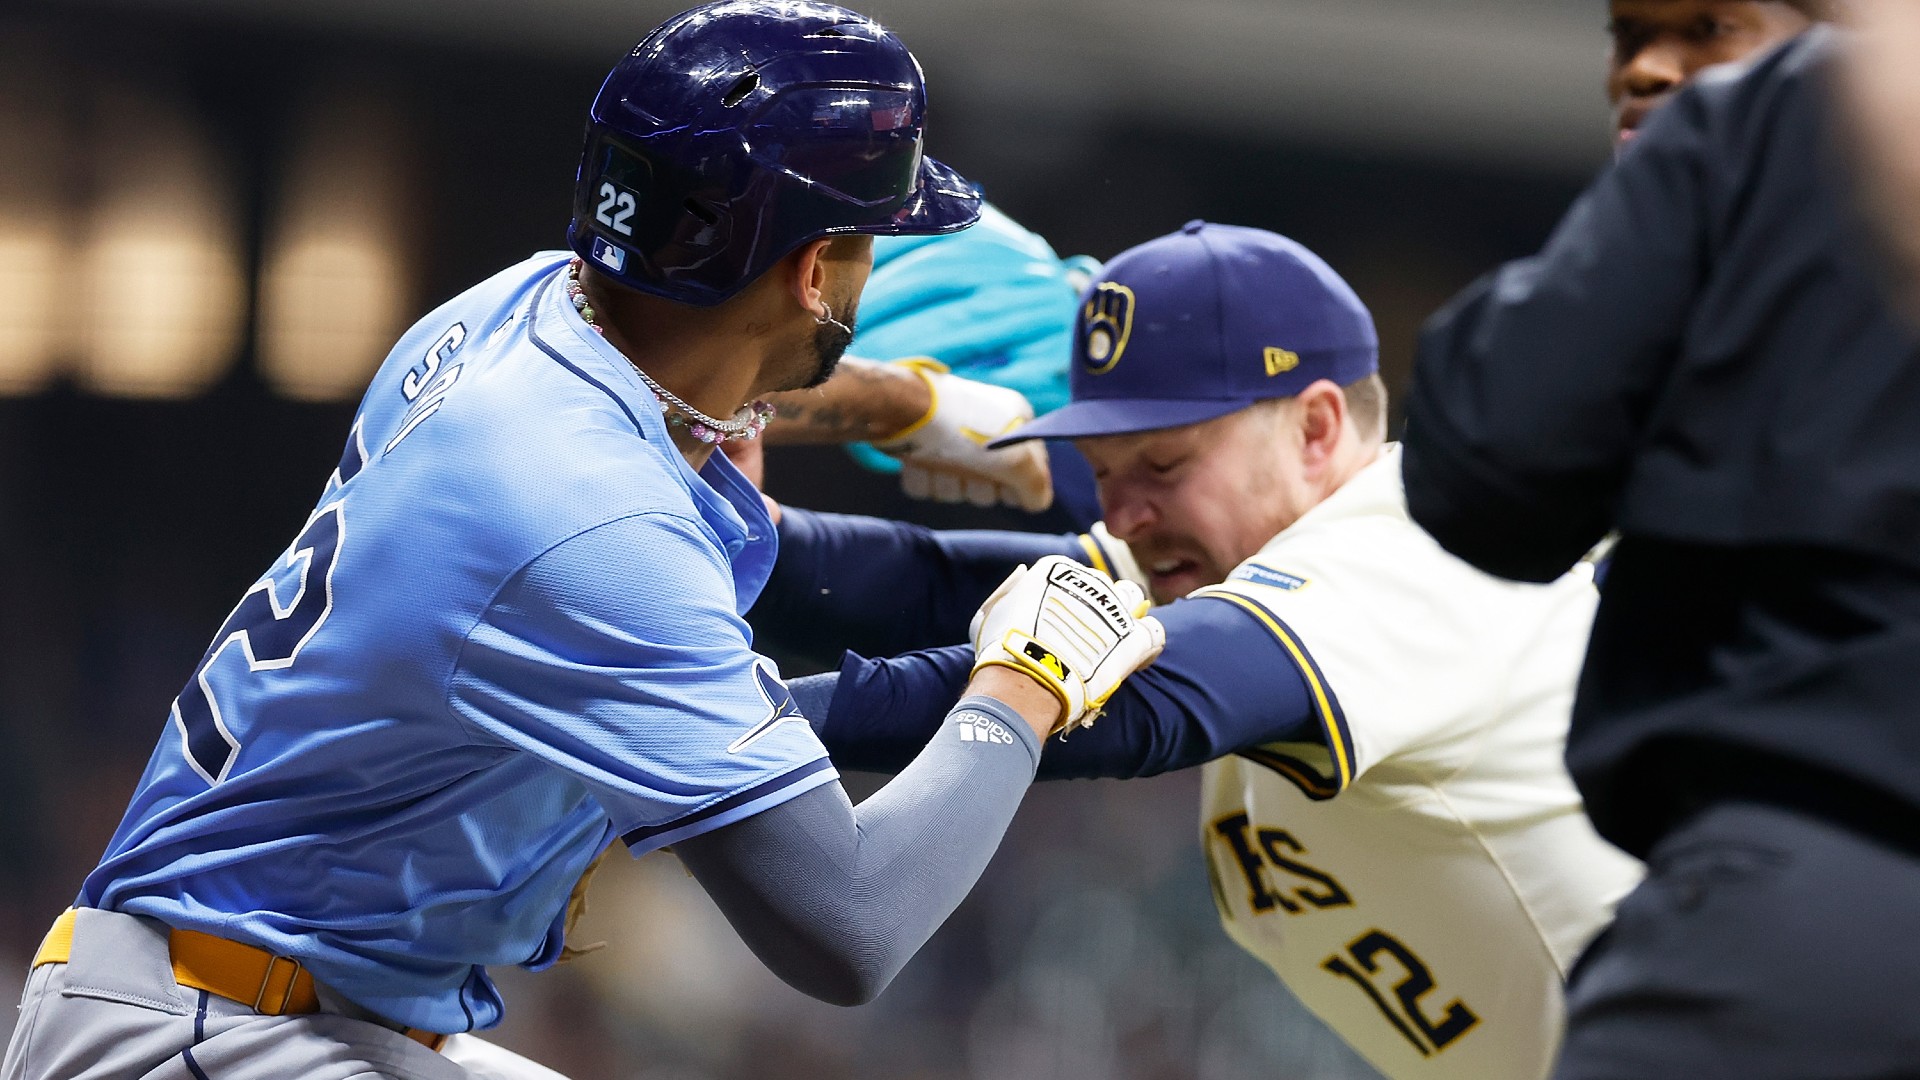 Brewers-Rays Game Turns Wild With Punches Thrown